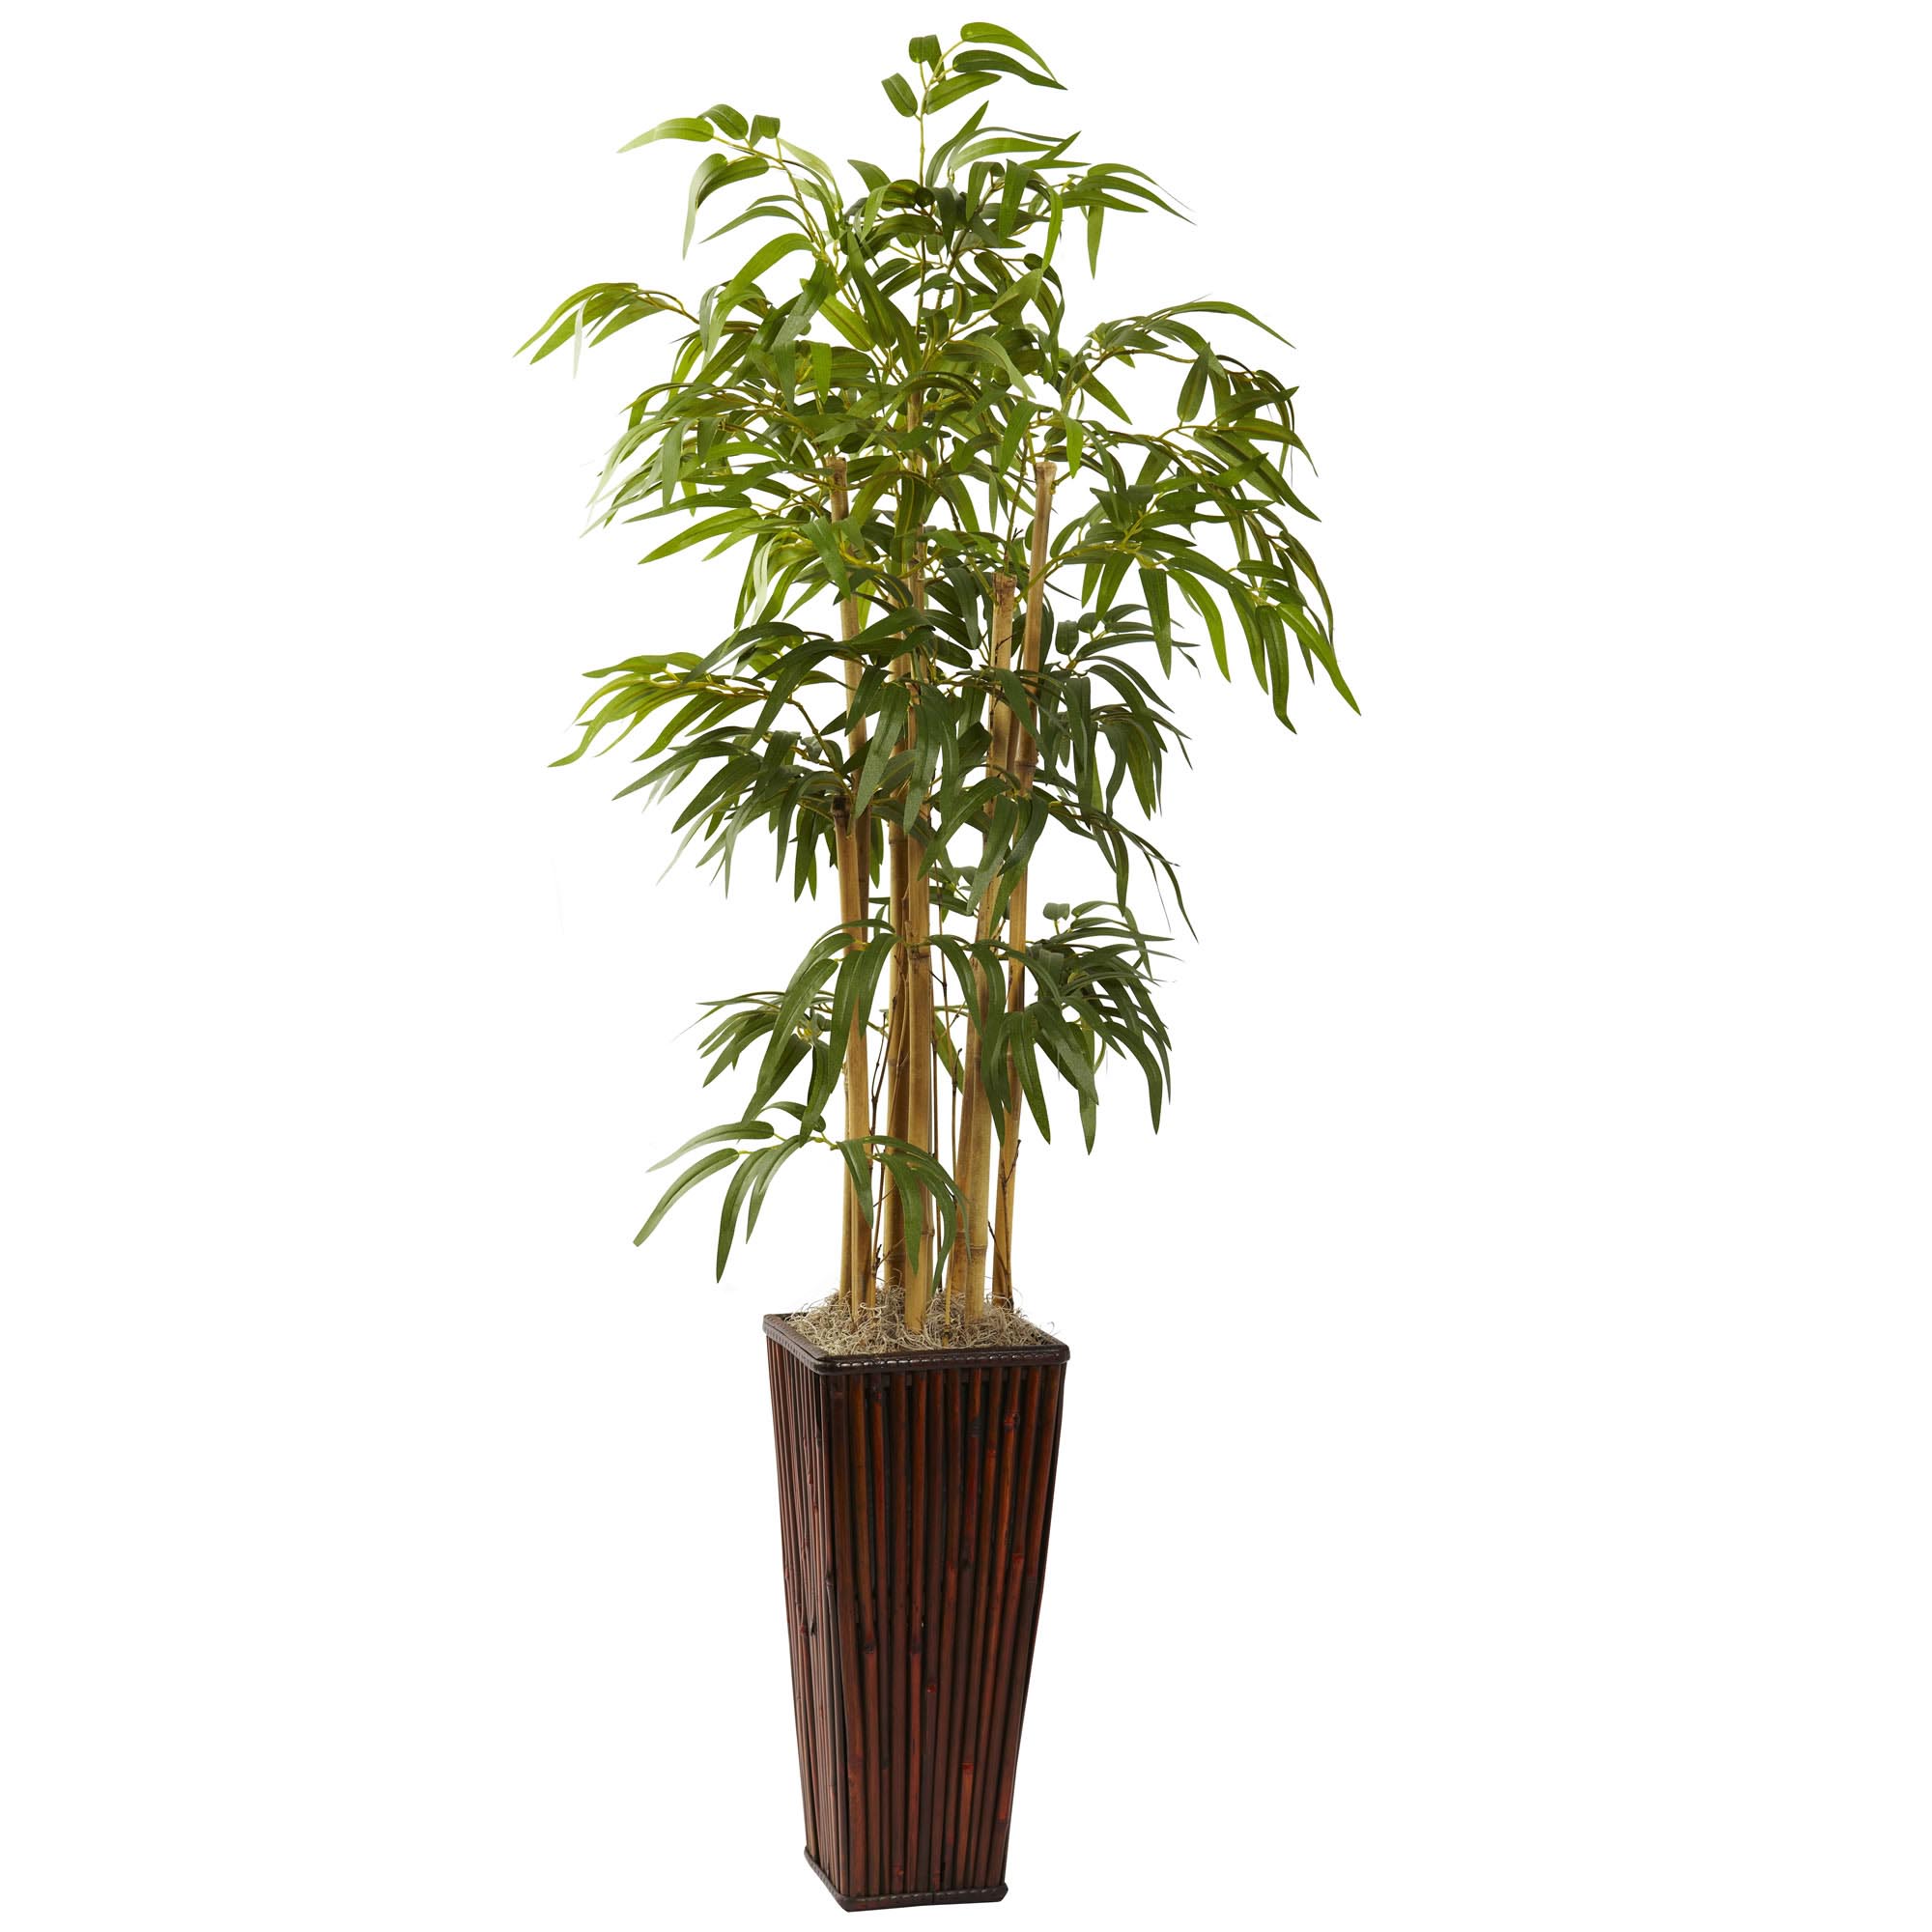 4 Foot Artificial Bamboo In Decorative Planter